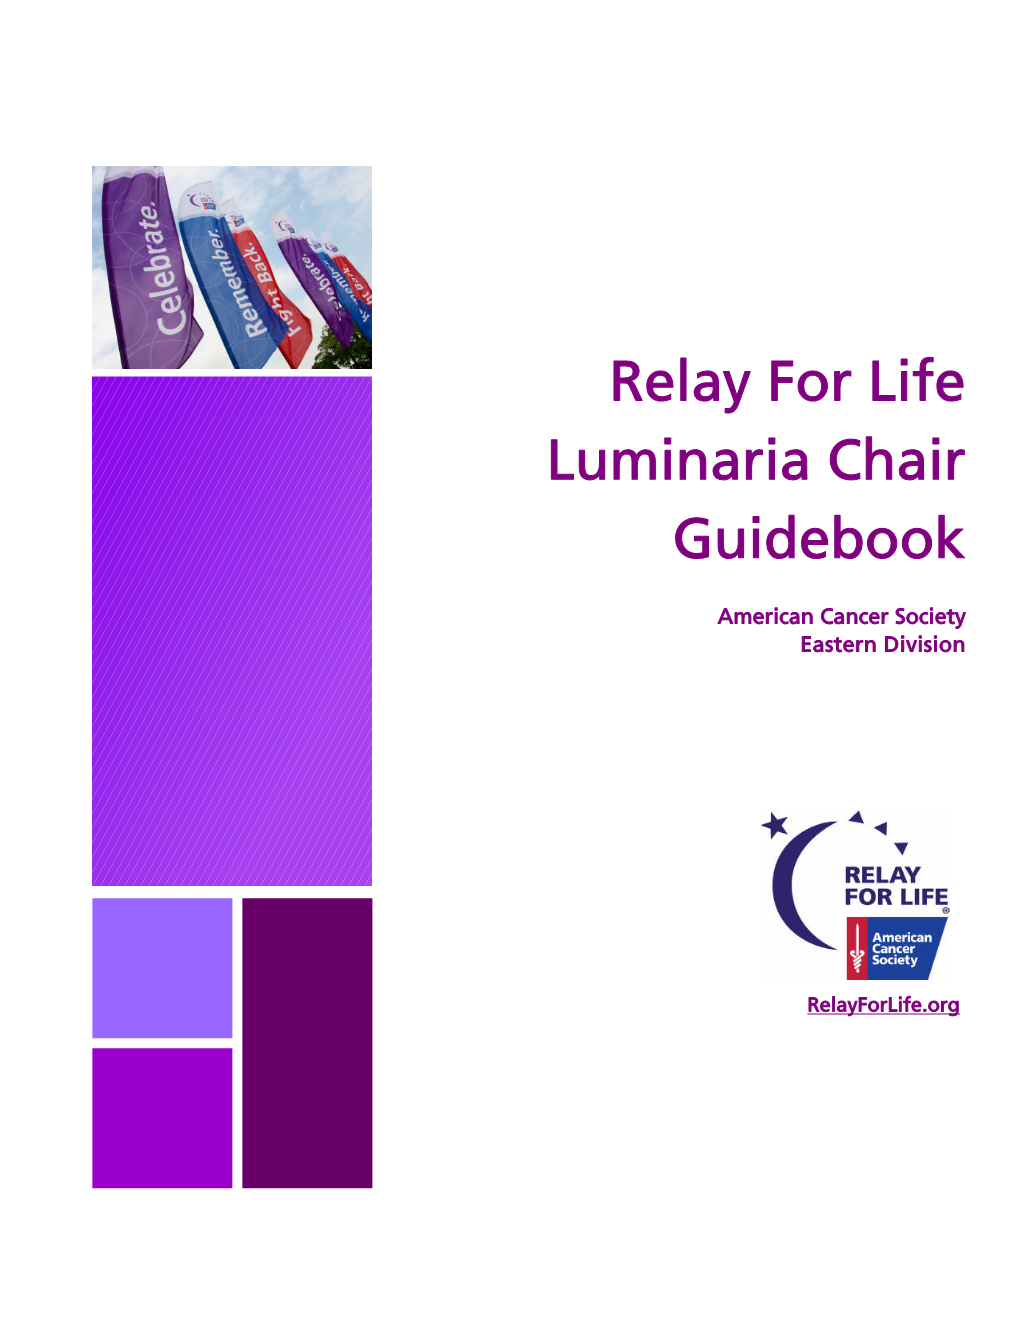 Relay for Life Luminaria Chair Guidebook